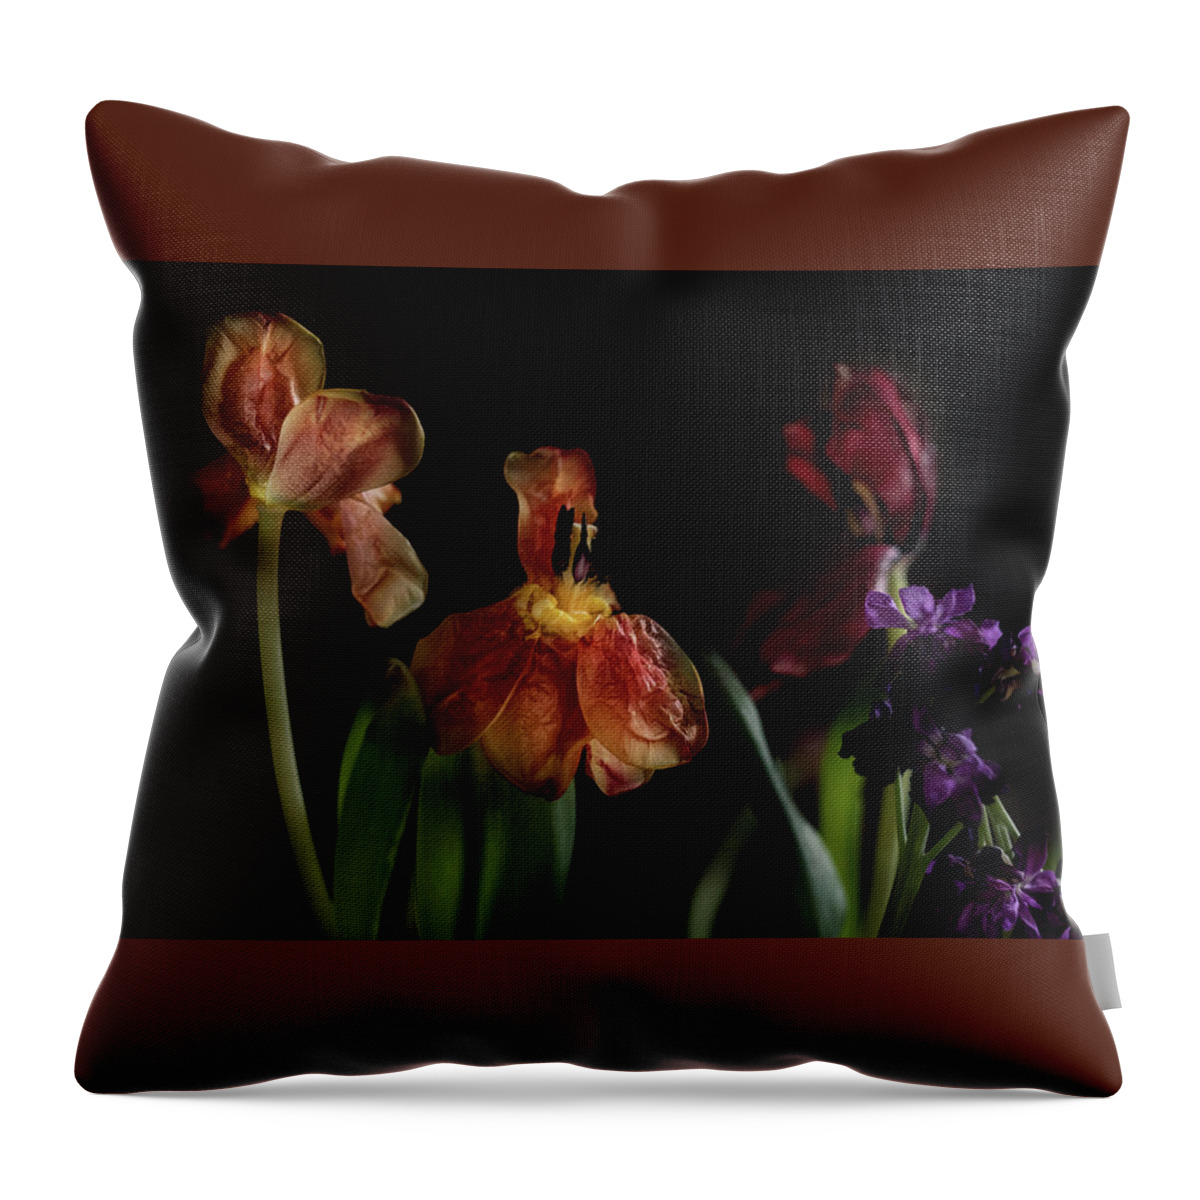 Tulips Flowers Floral Botany Botanical Still Life Vase Abundant Accent Aromatic Arranged Artful Artistic Beautiful Blooming Blossoming Budding Colorful Jewel-toned Luxurious Throw Pillow featuring the photograph A Passing Fancy by William Fields